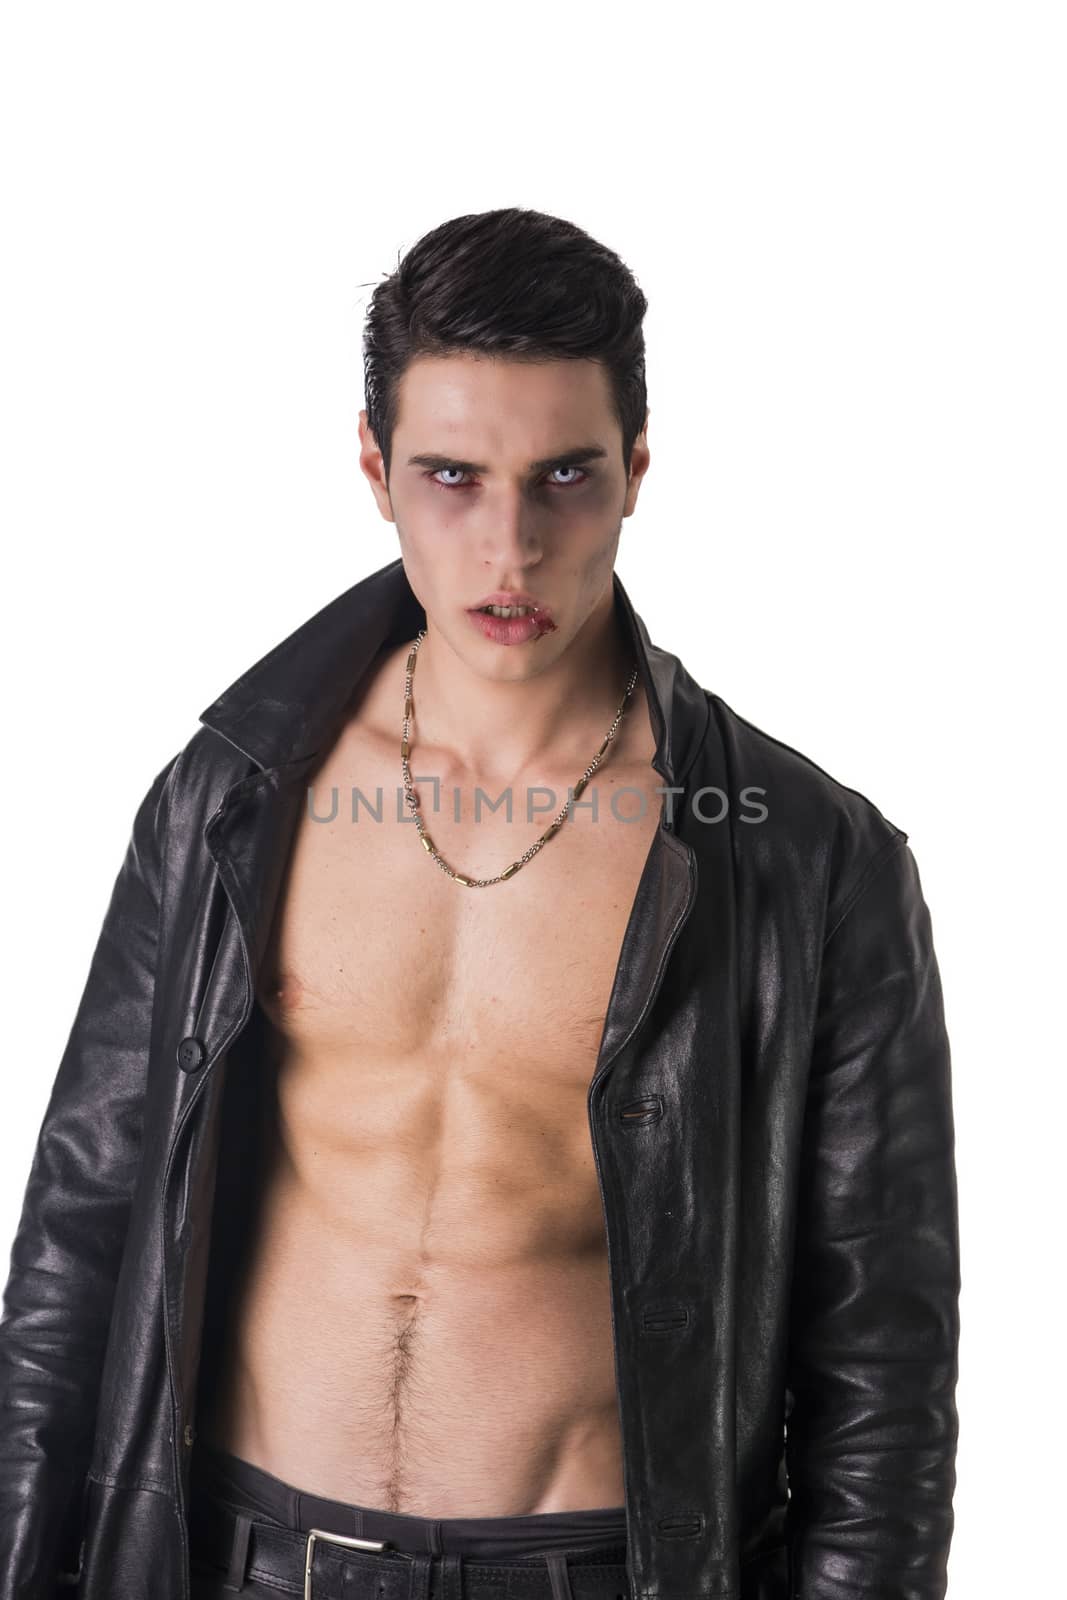 Young Vampire Man in an Open Black Leather Jacket, Showing his Chest and Abs by artofphoto